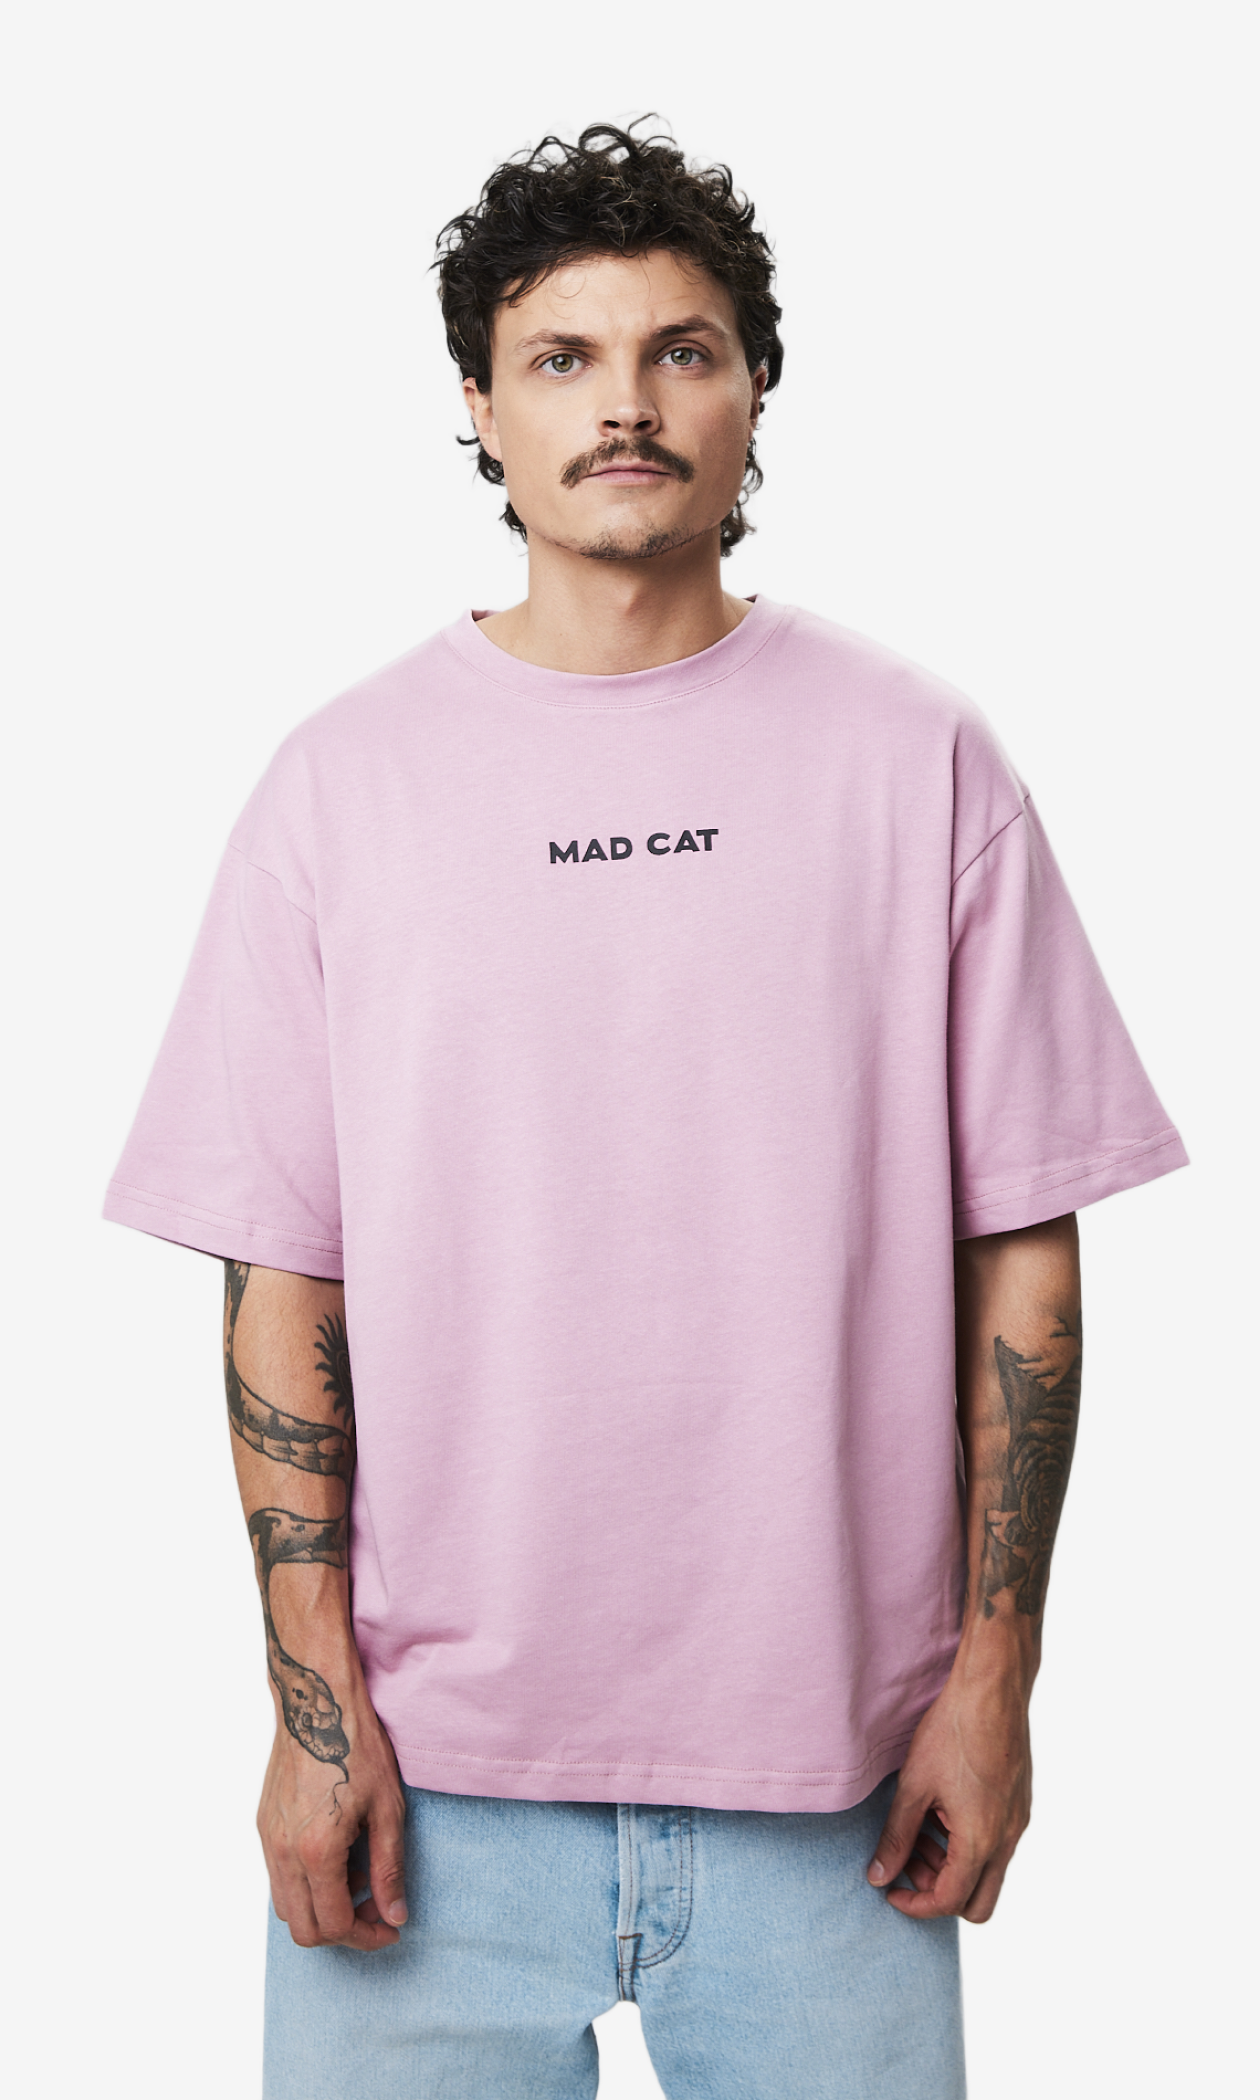 Mad-Cat-T-Shirt-pink-male